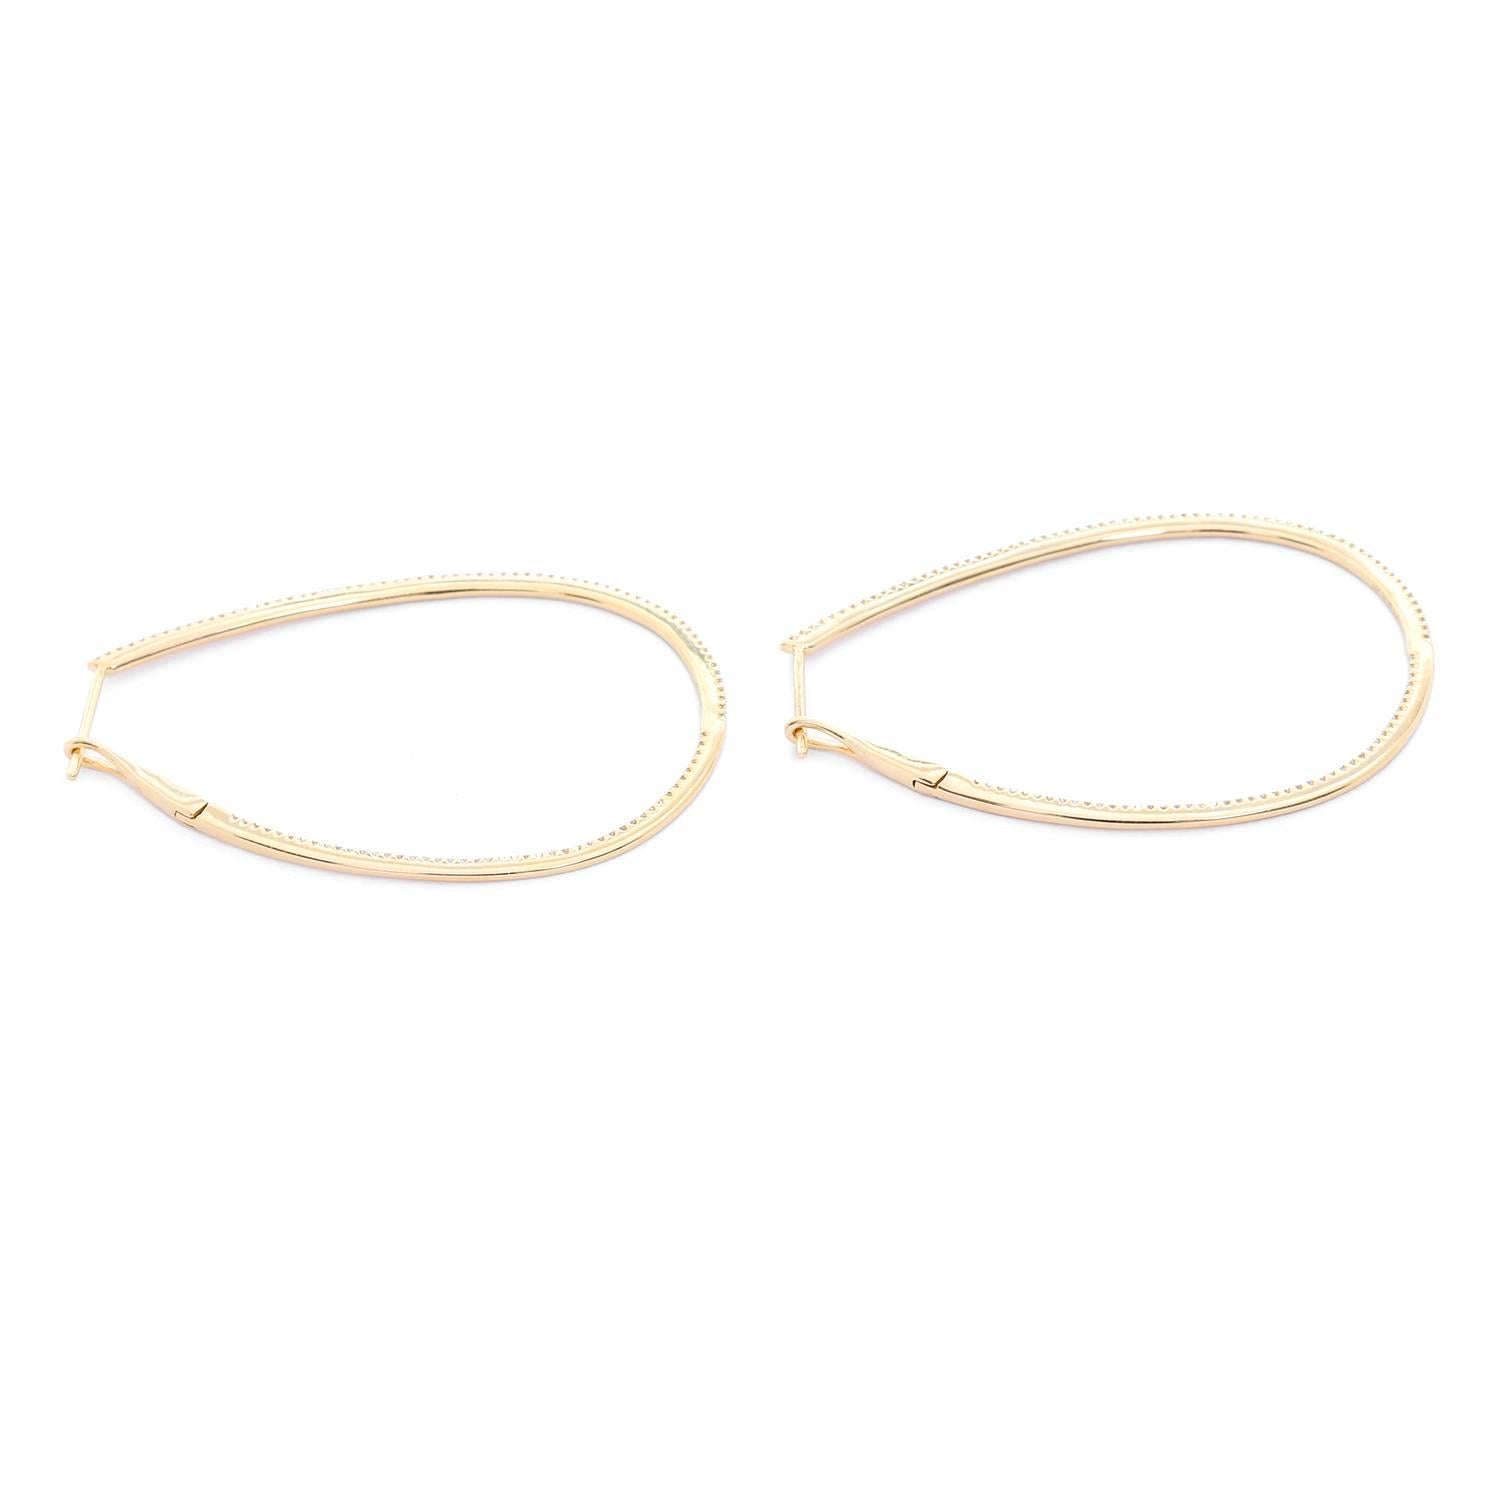 Contemporary Stunning Tear Drop Inside-Out Diamond Hoops